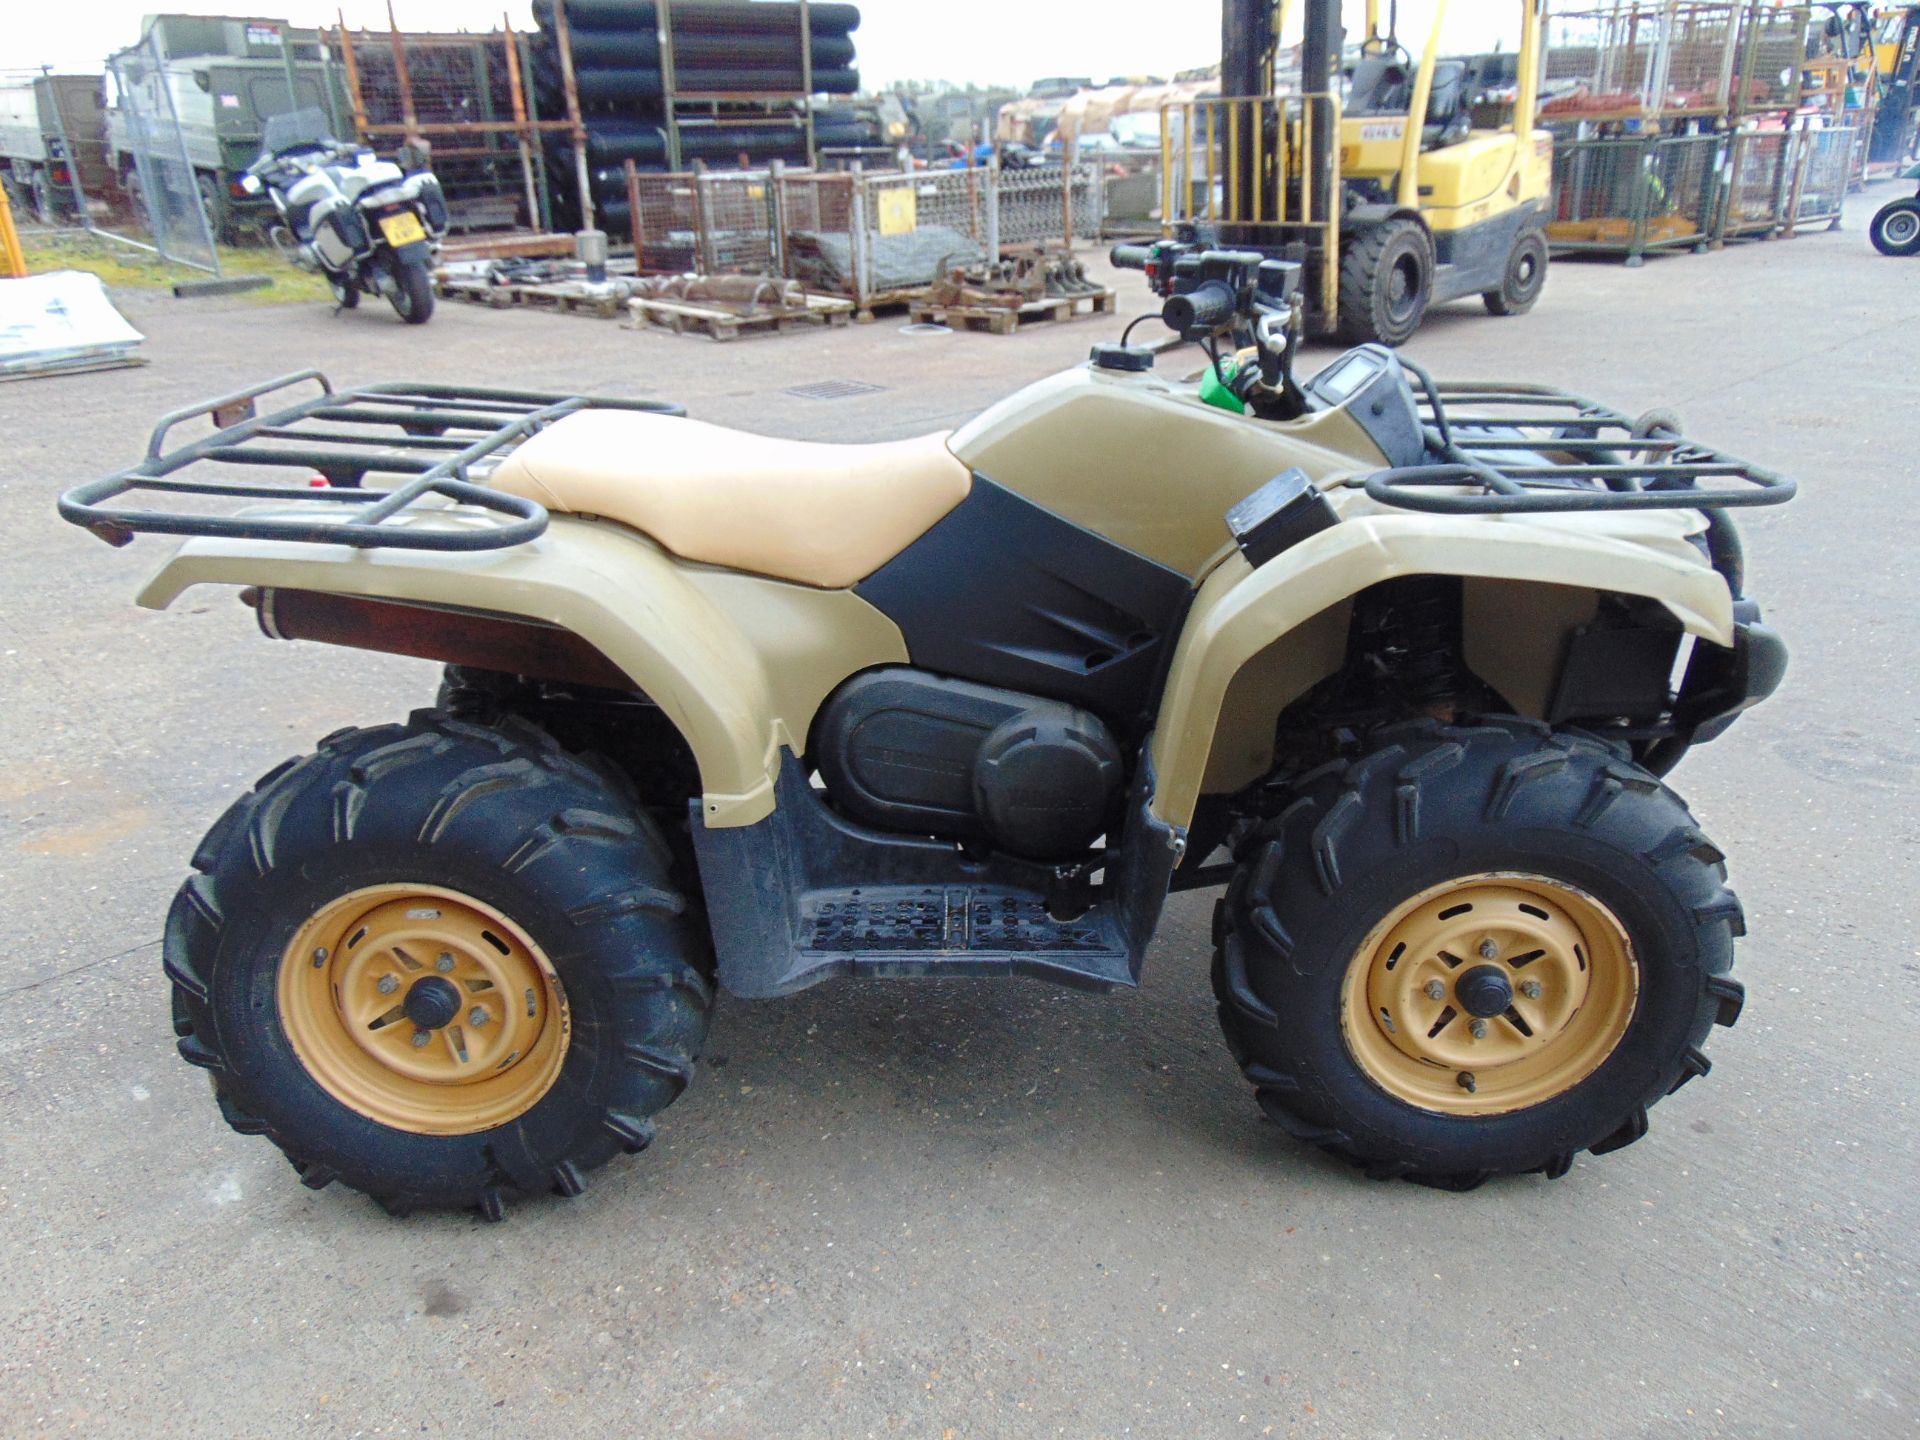 Recent Release Military Specification Yamaha Grizzly 450 4 x 4 ATV Quad Bike ONLY 59 HOURS!!! - Image 5 of 20